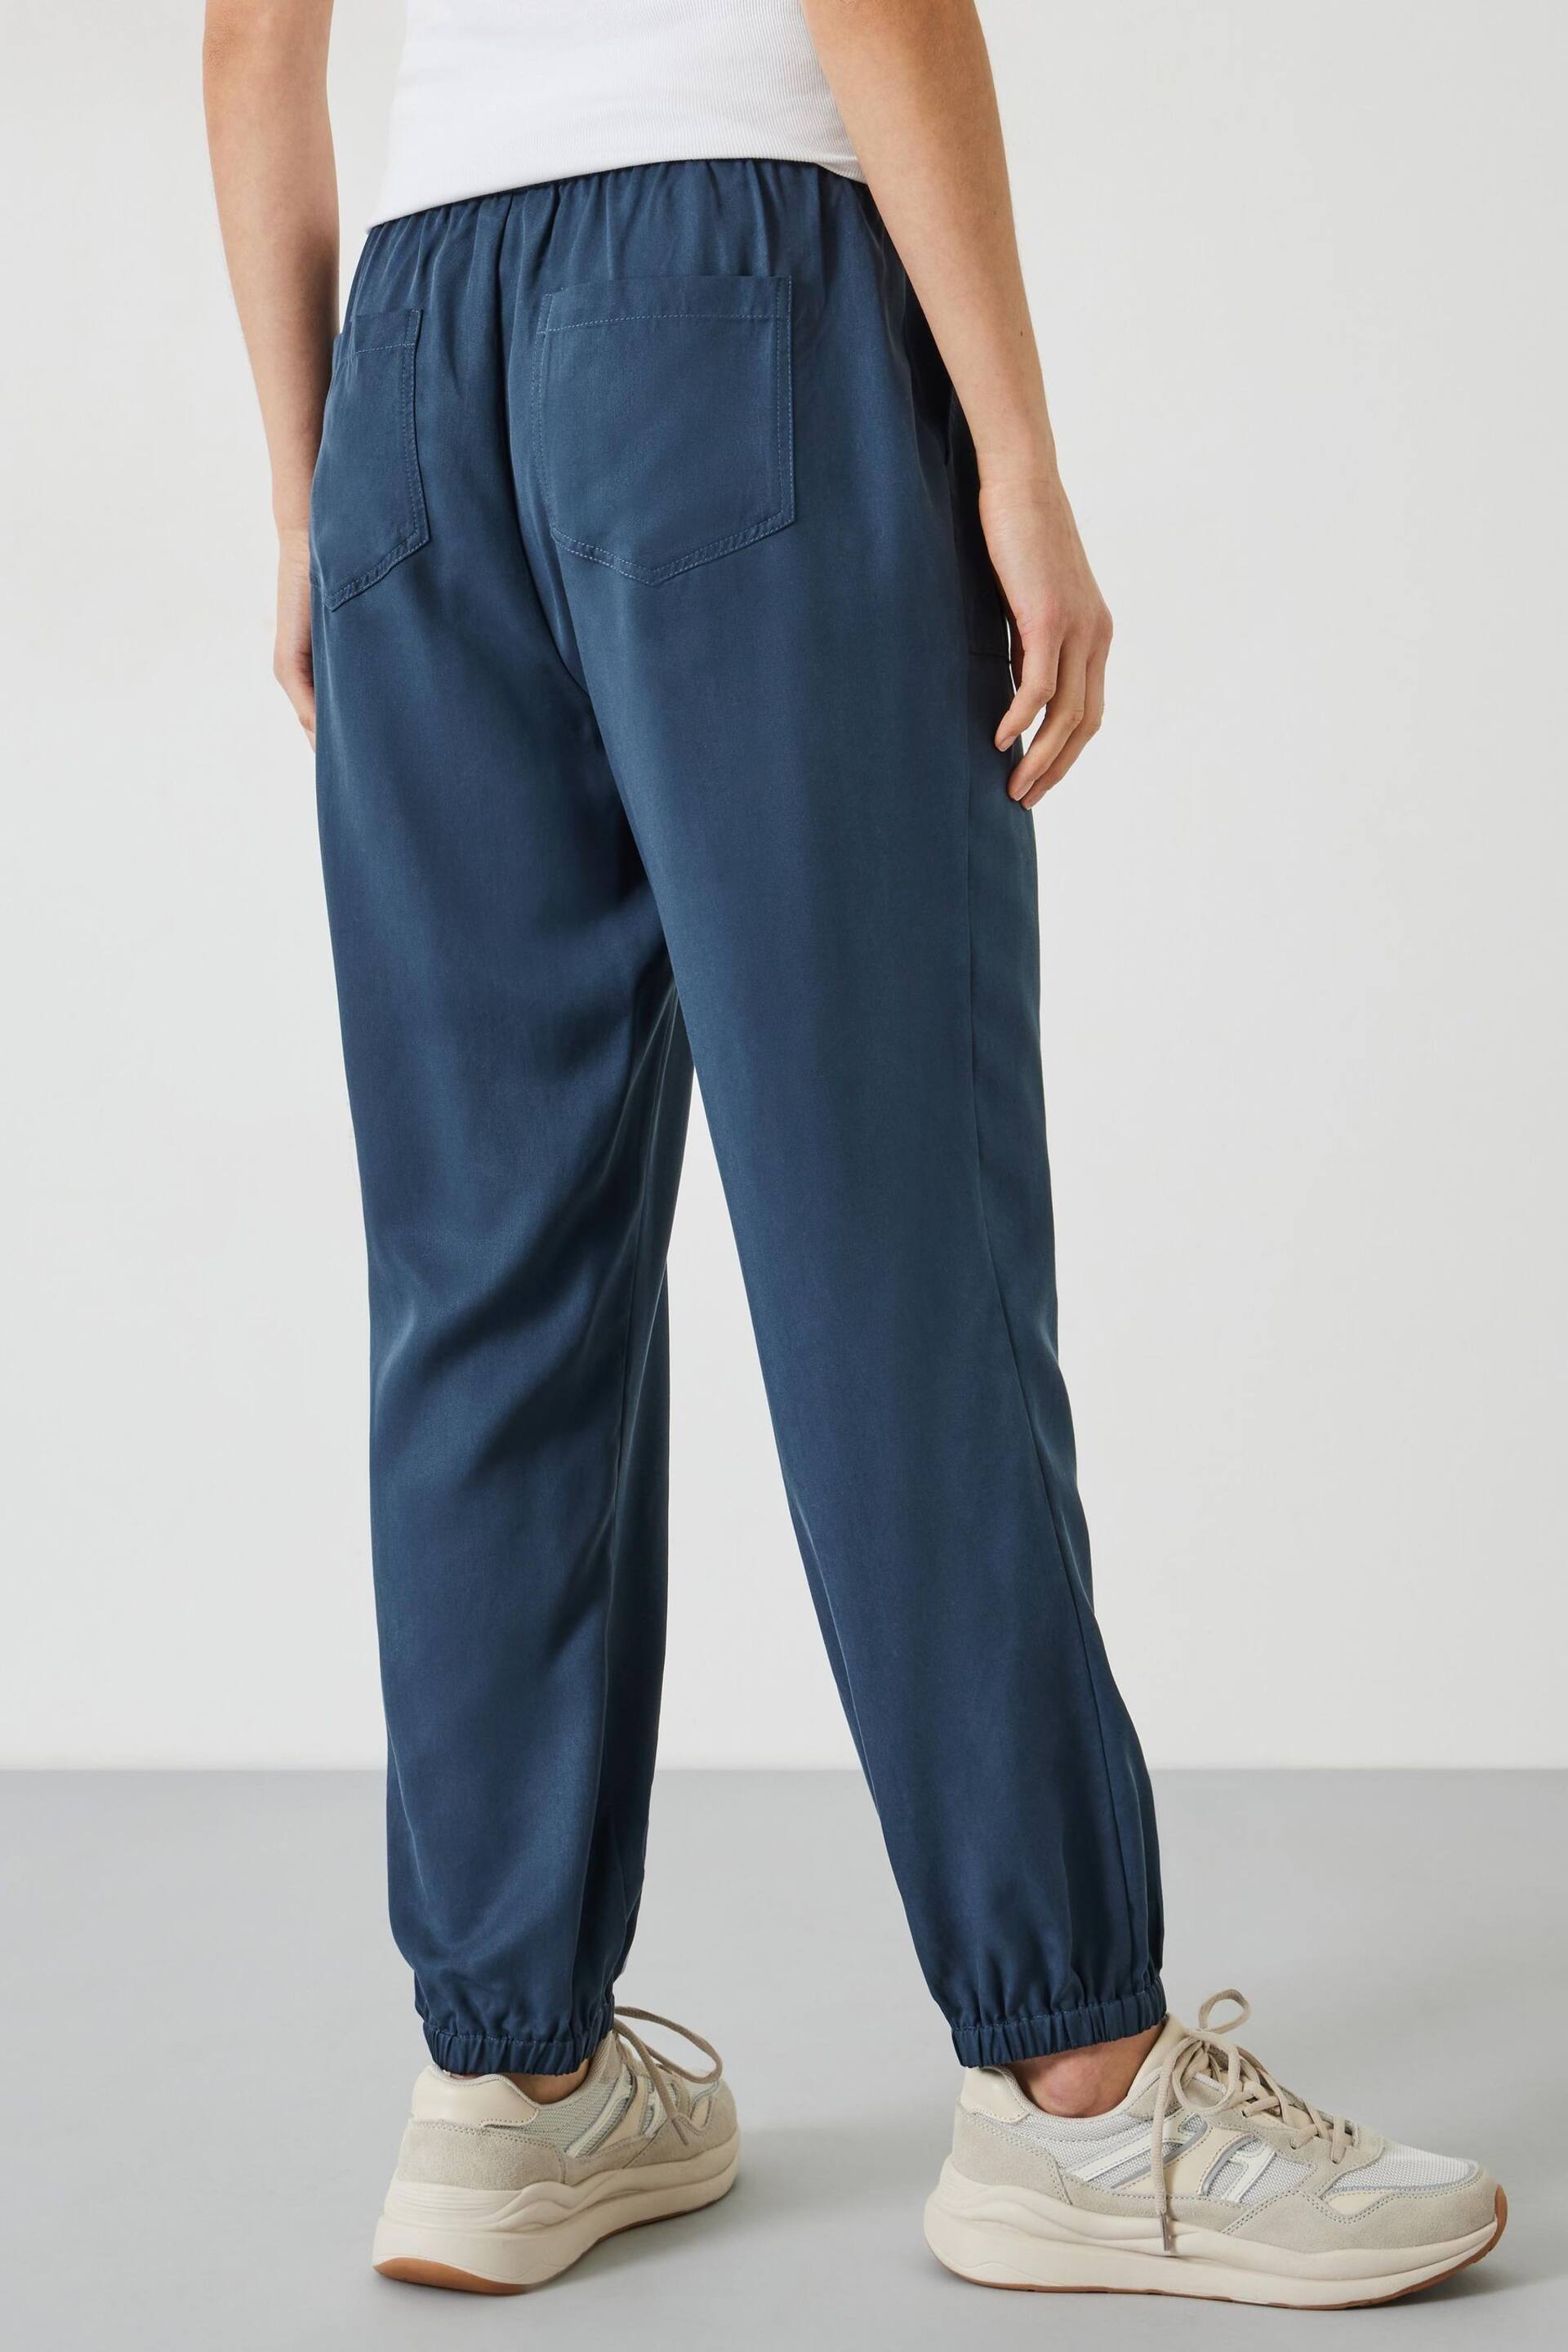 Hush Blue Monica Trousers - Image 2 of 6